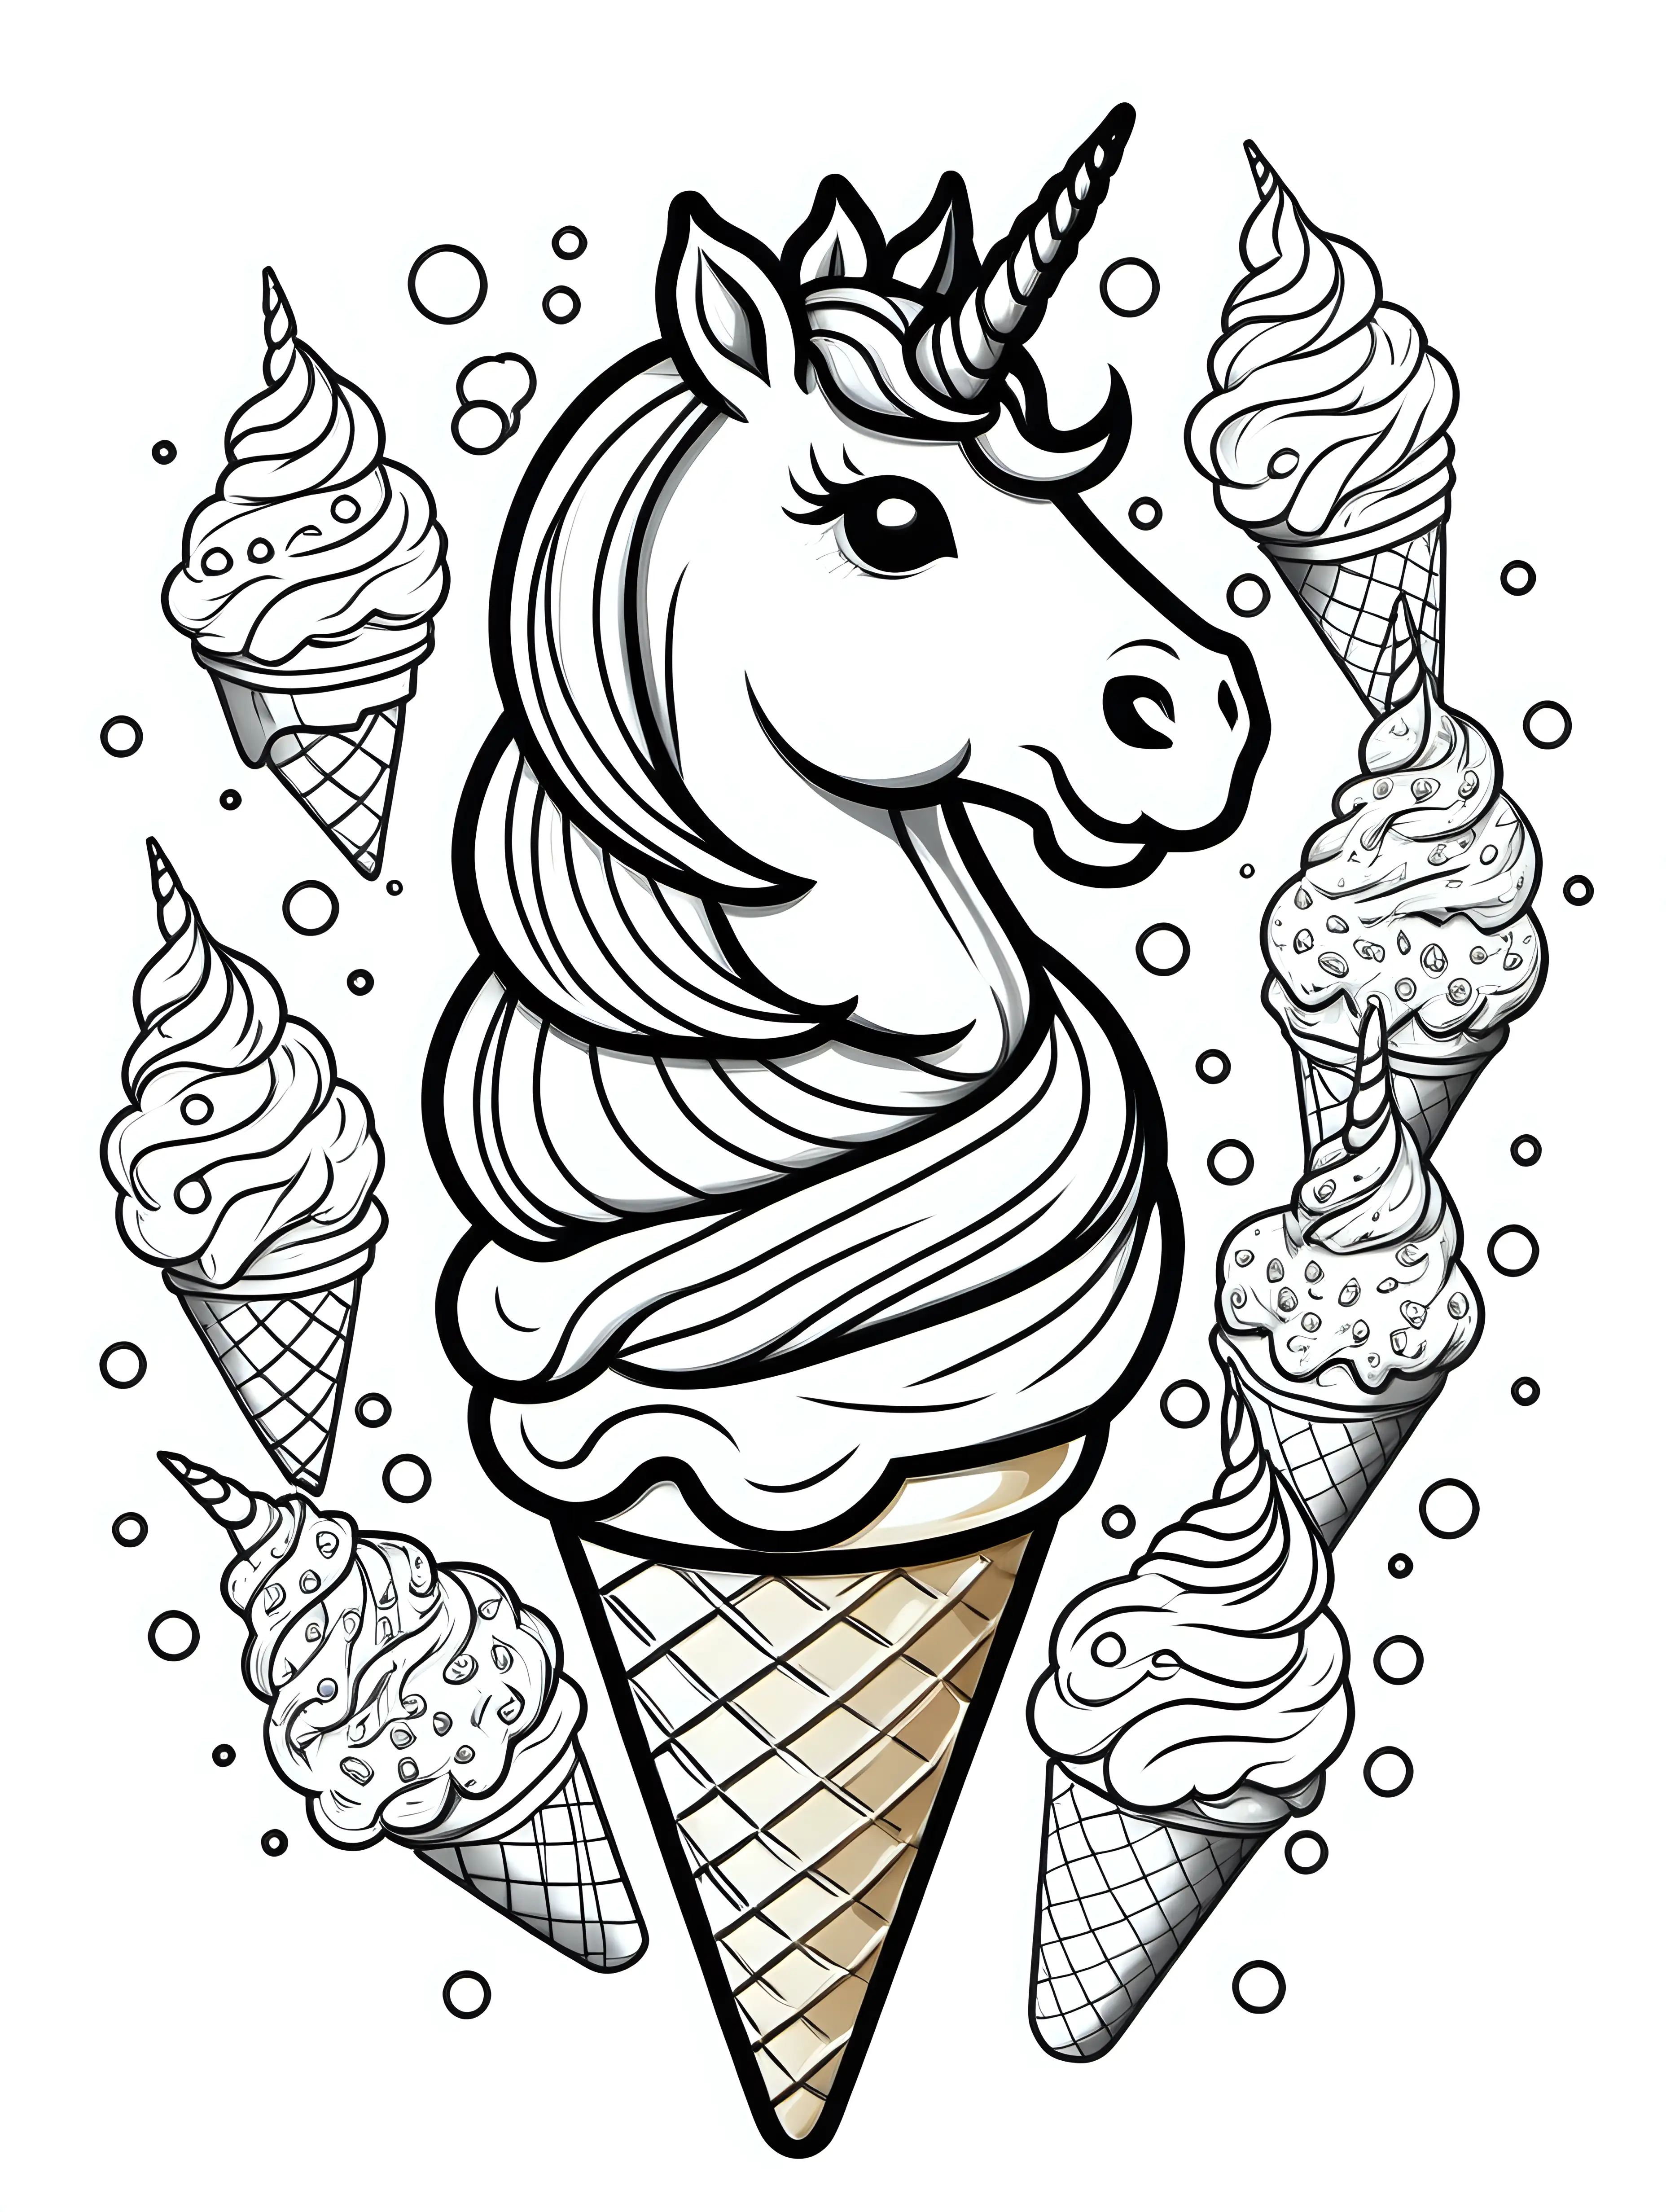 Unicorn in Ice Cream Coloring Page Playful Black Outlines No Shading